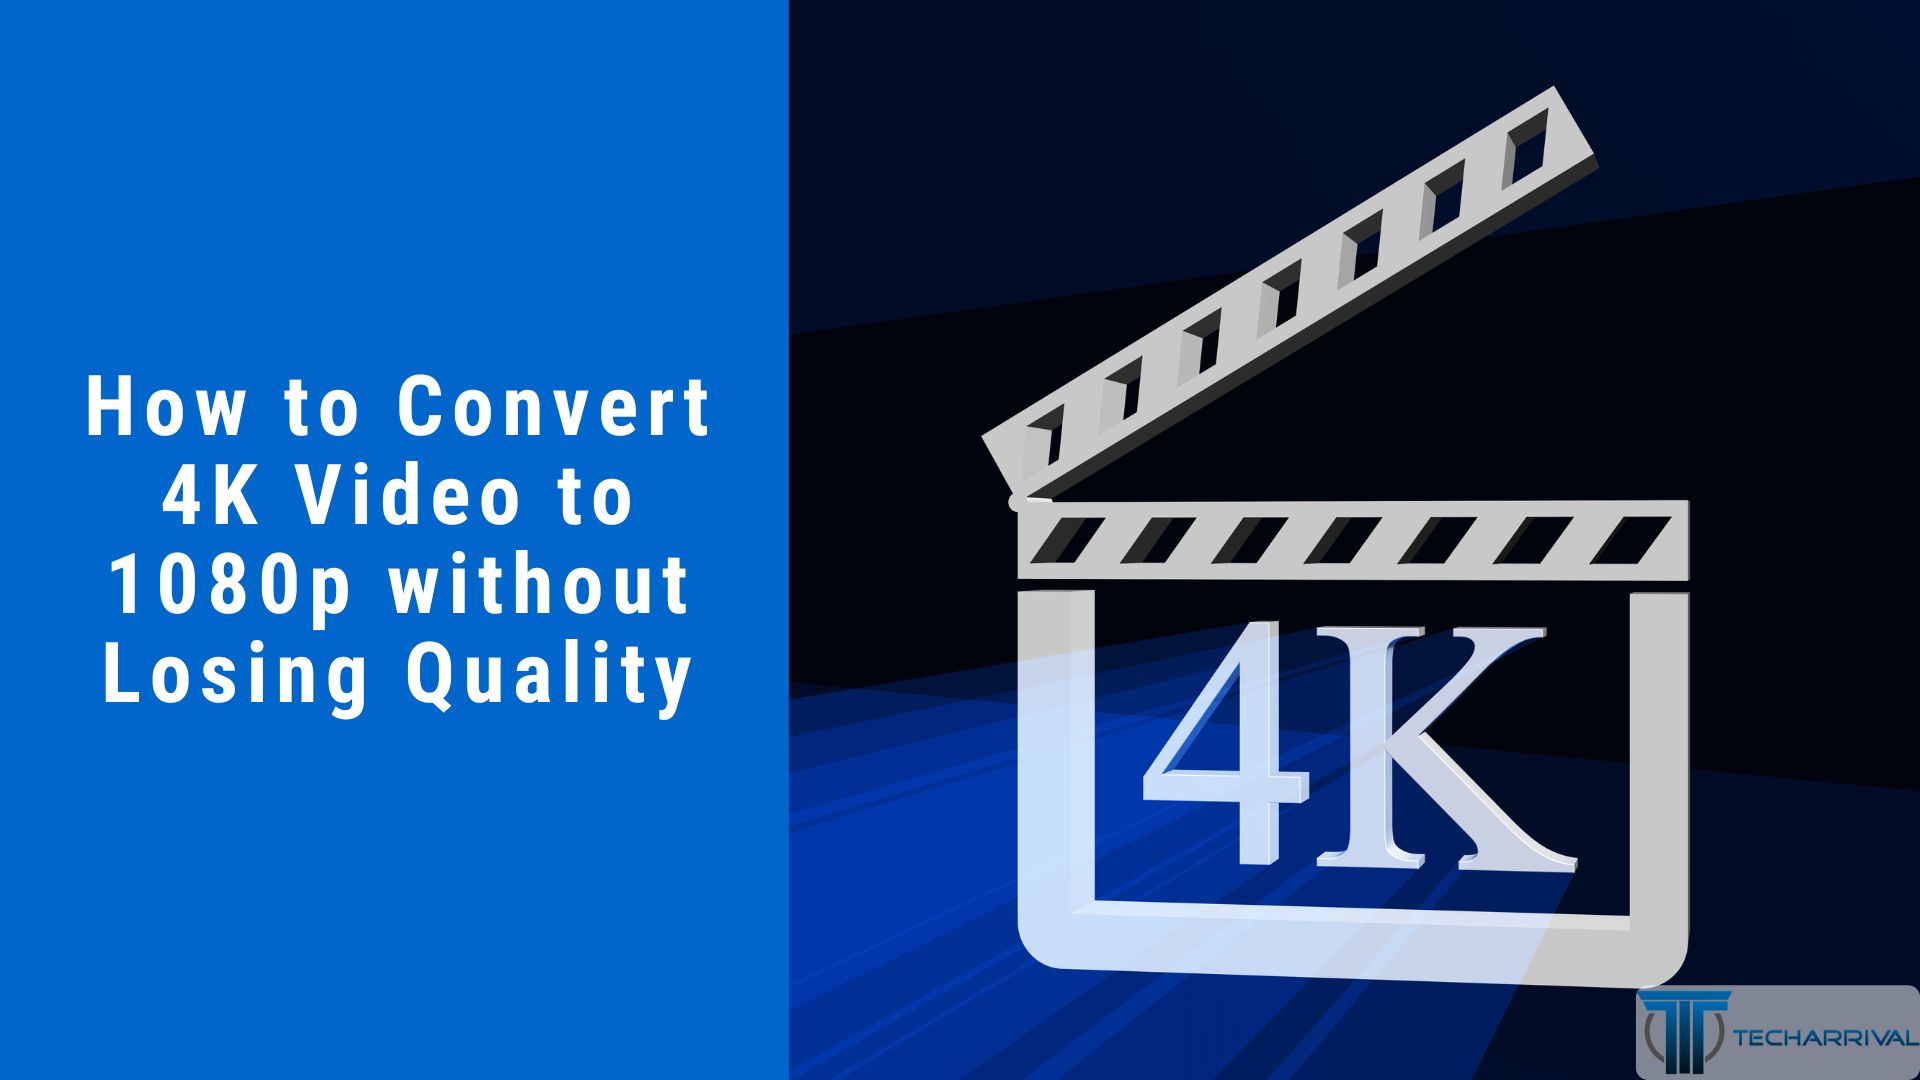 How to Convert 4K Video to 1080p without Losing Quality